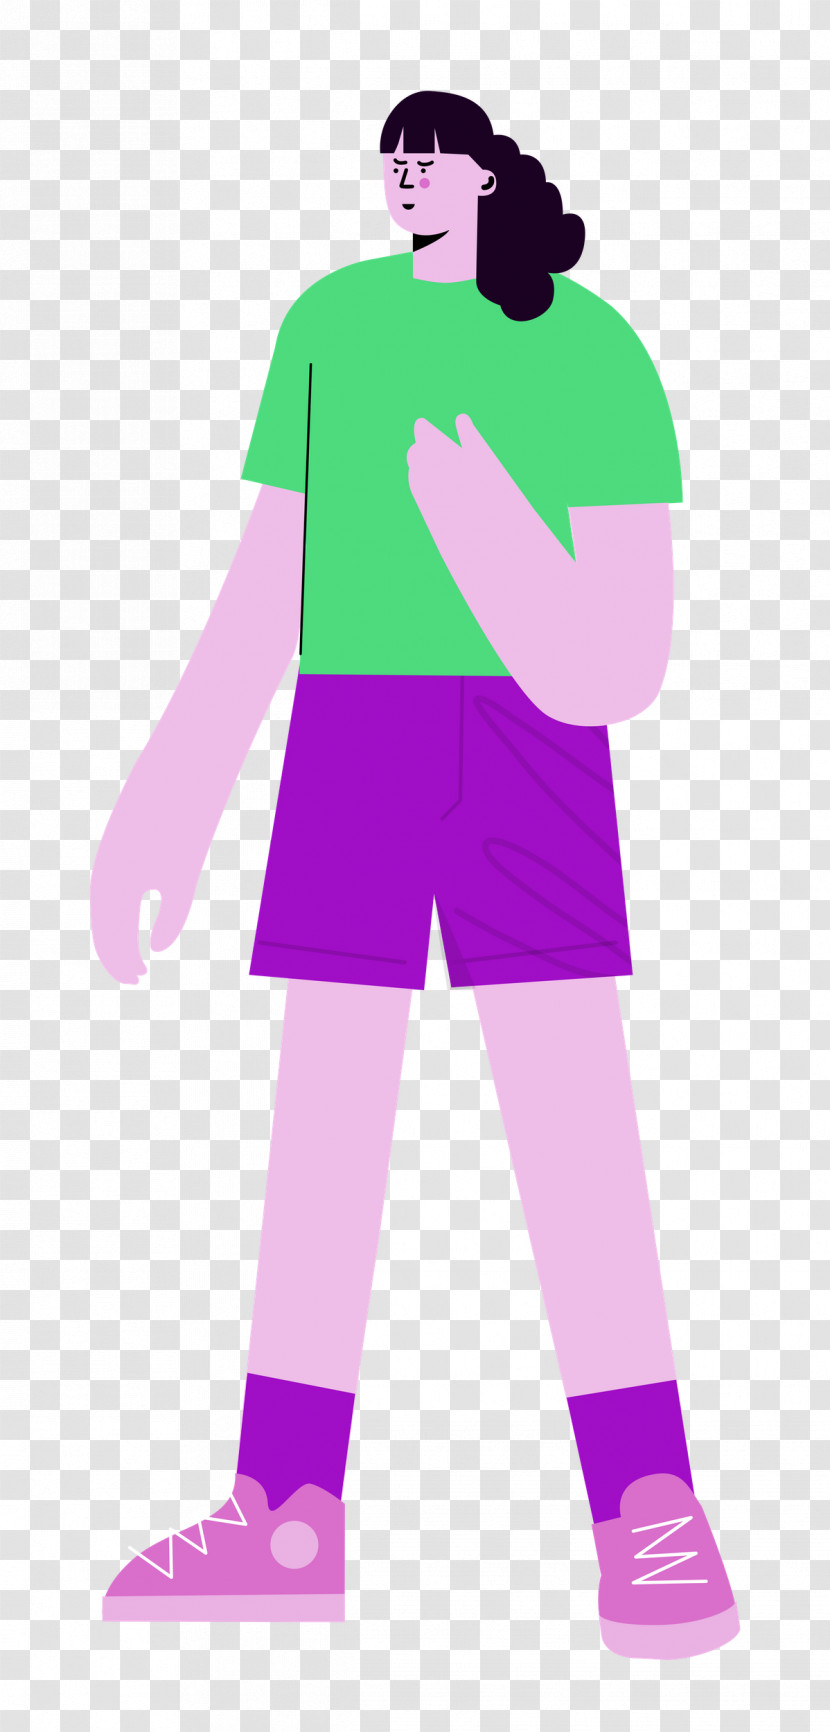 Standing Shorts Woman Transparent PNG